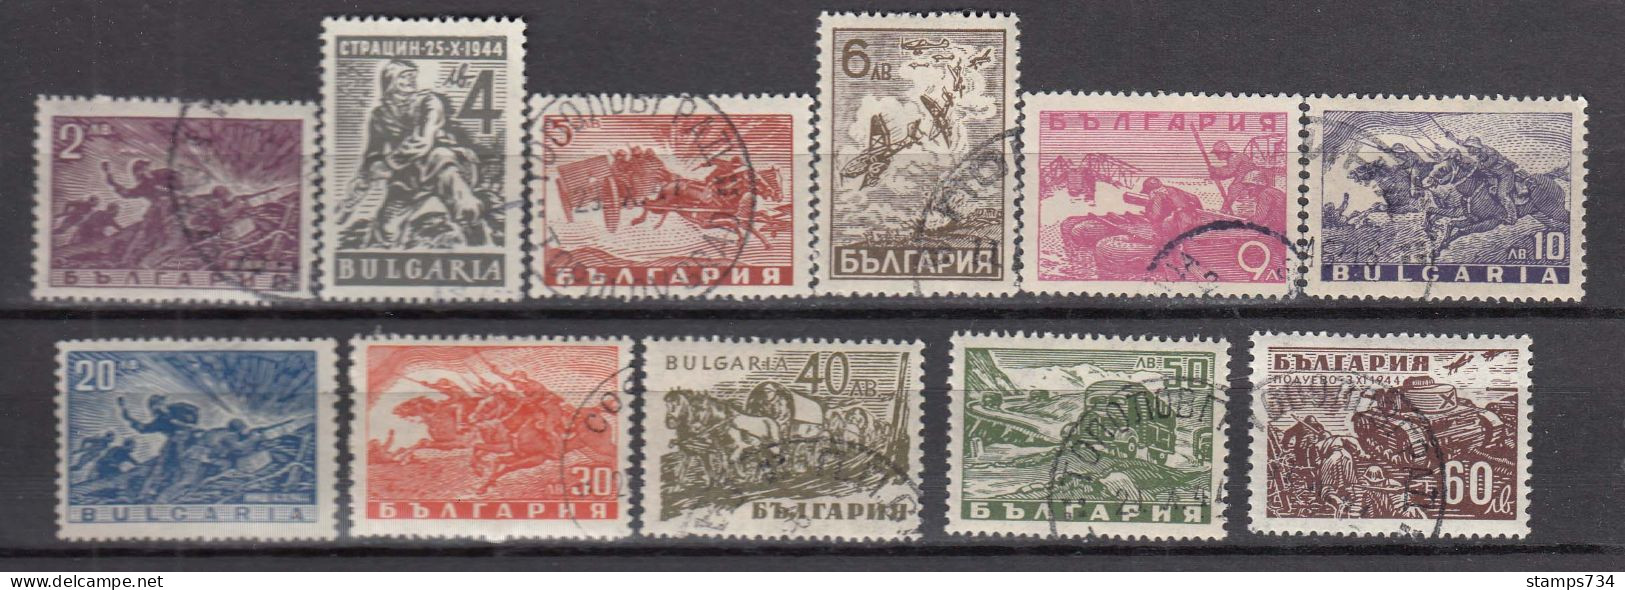 Bulgaria 1946 - Serie "Guerre Et Patrie", YT 478/88, Used - Used Stamps